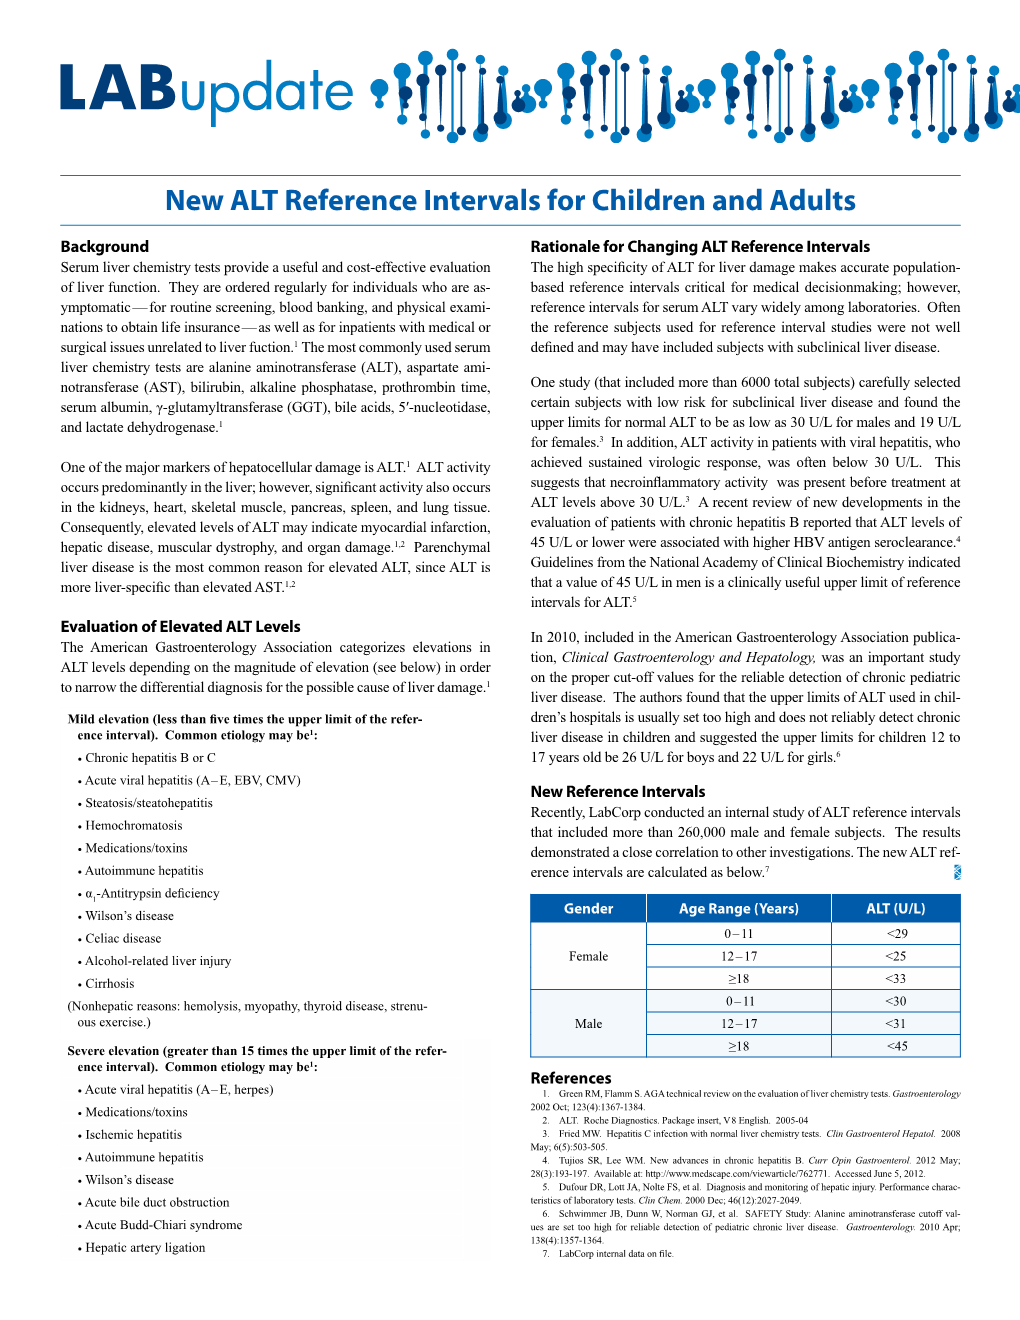 New ALT Reference Intervals for Children and Adults